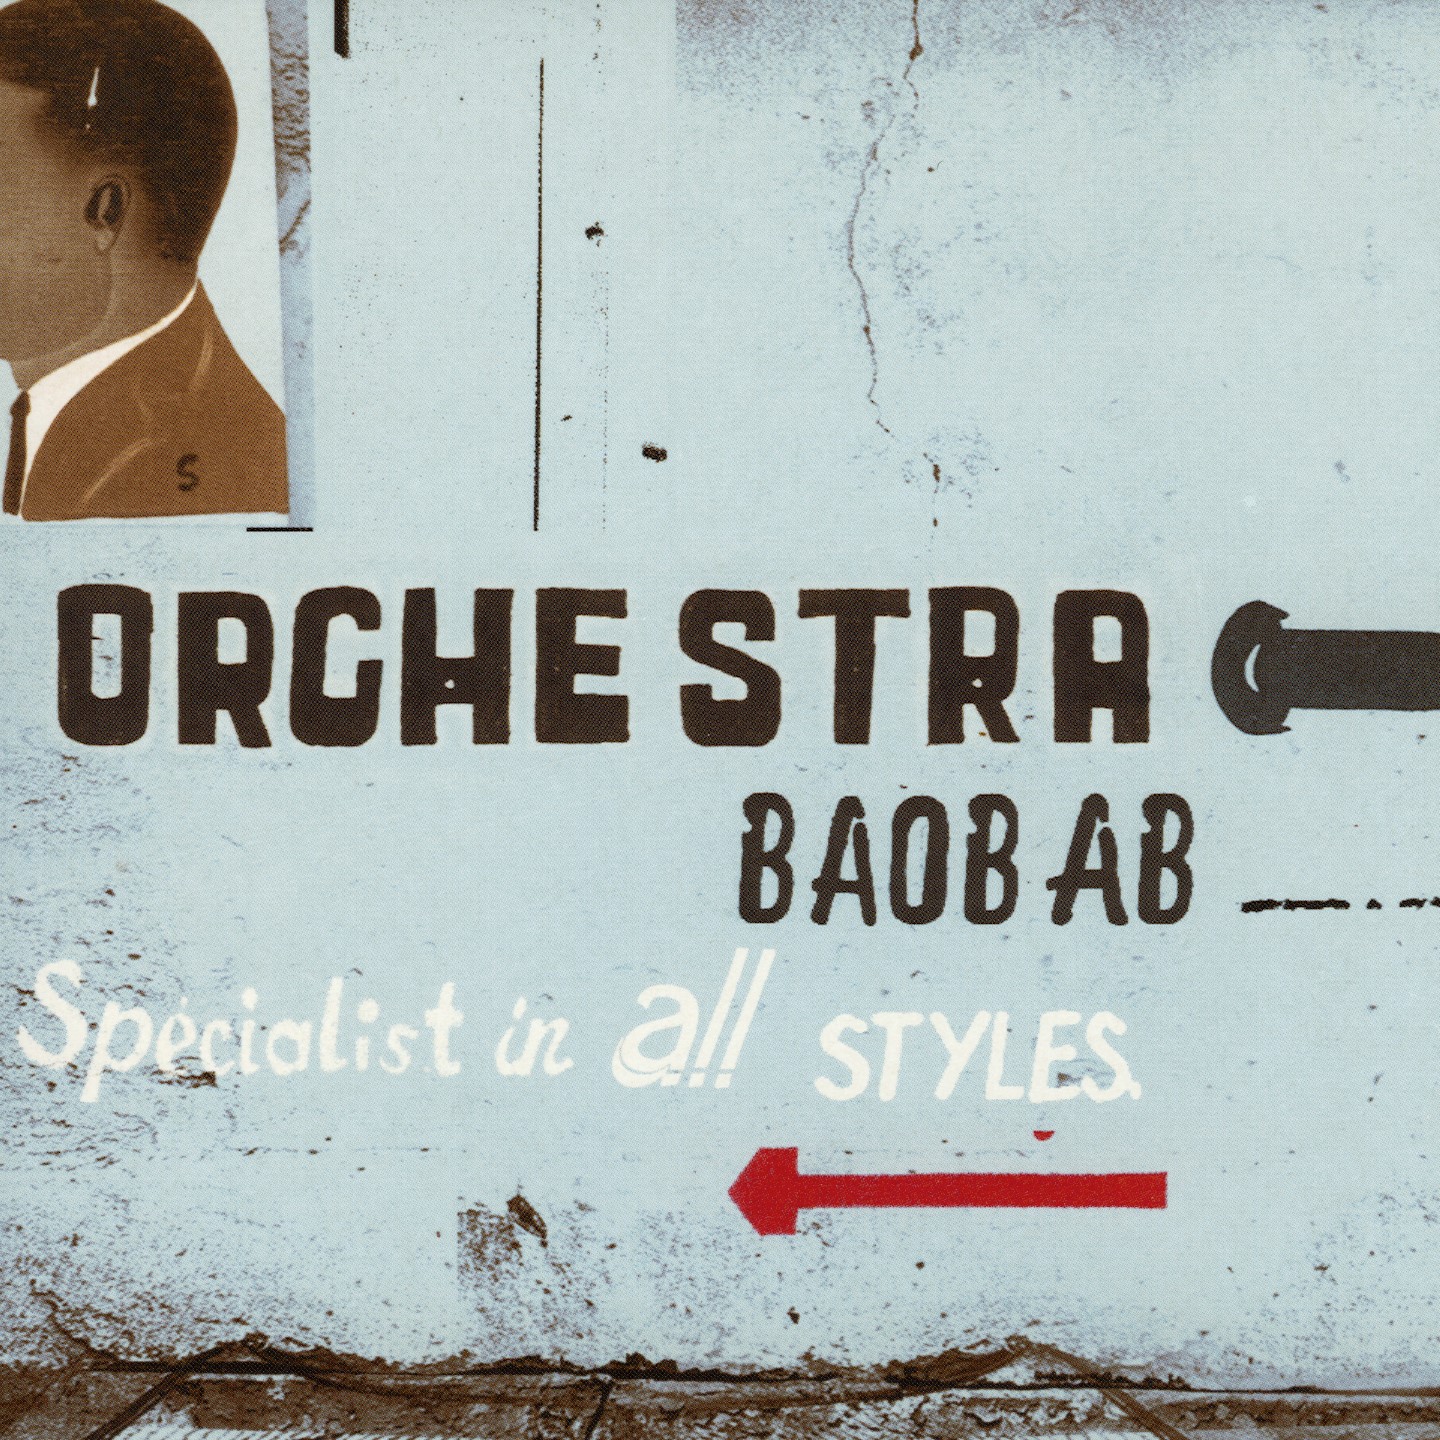 CD Shop - ORCHESTRA BAOBAB SPECIALIST IN ALL STYLES